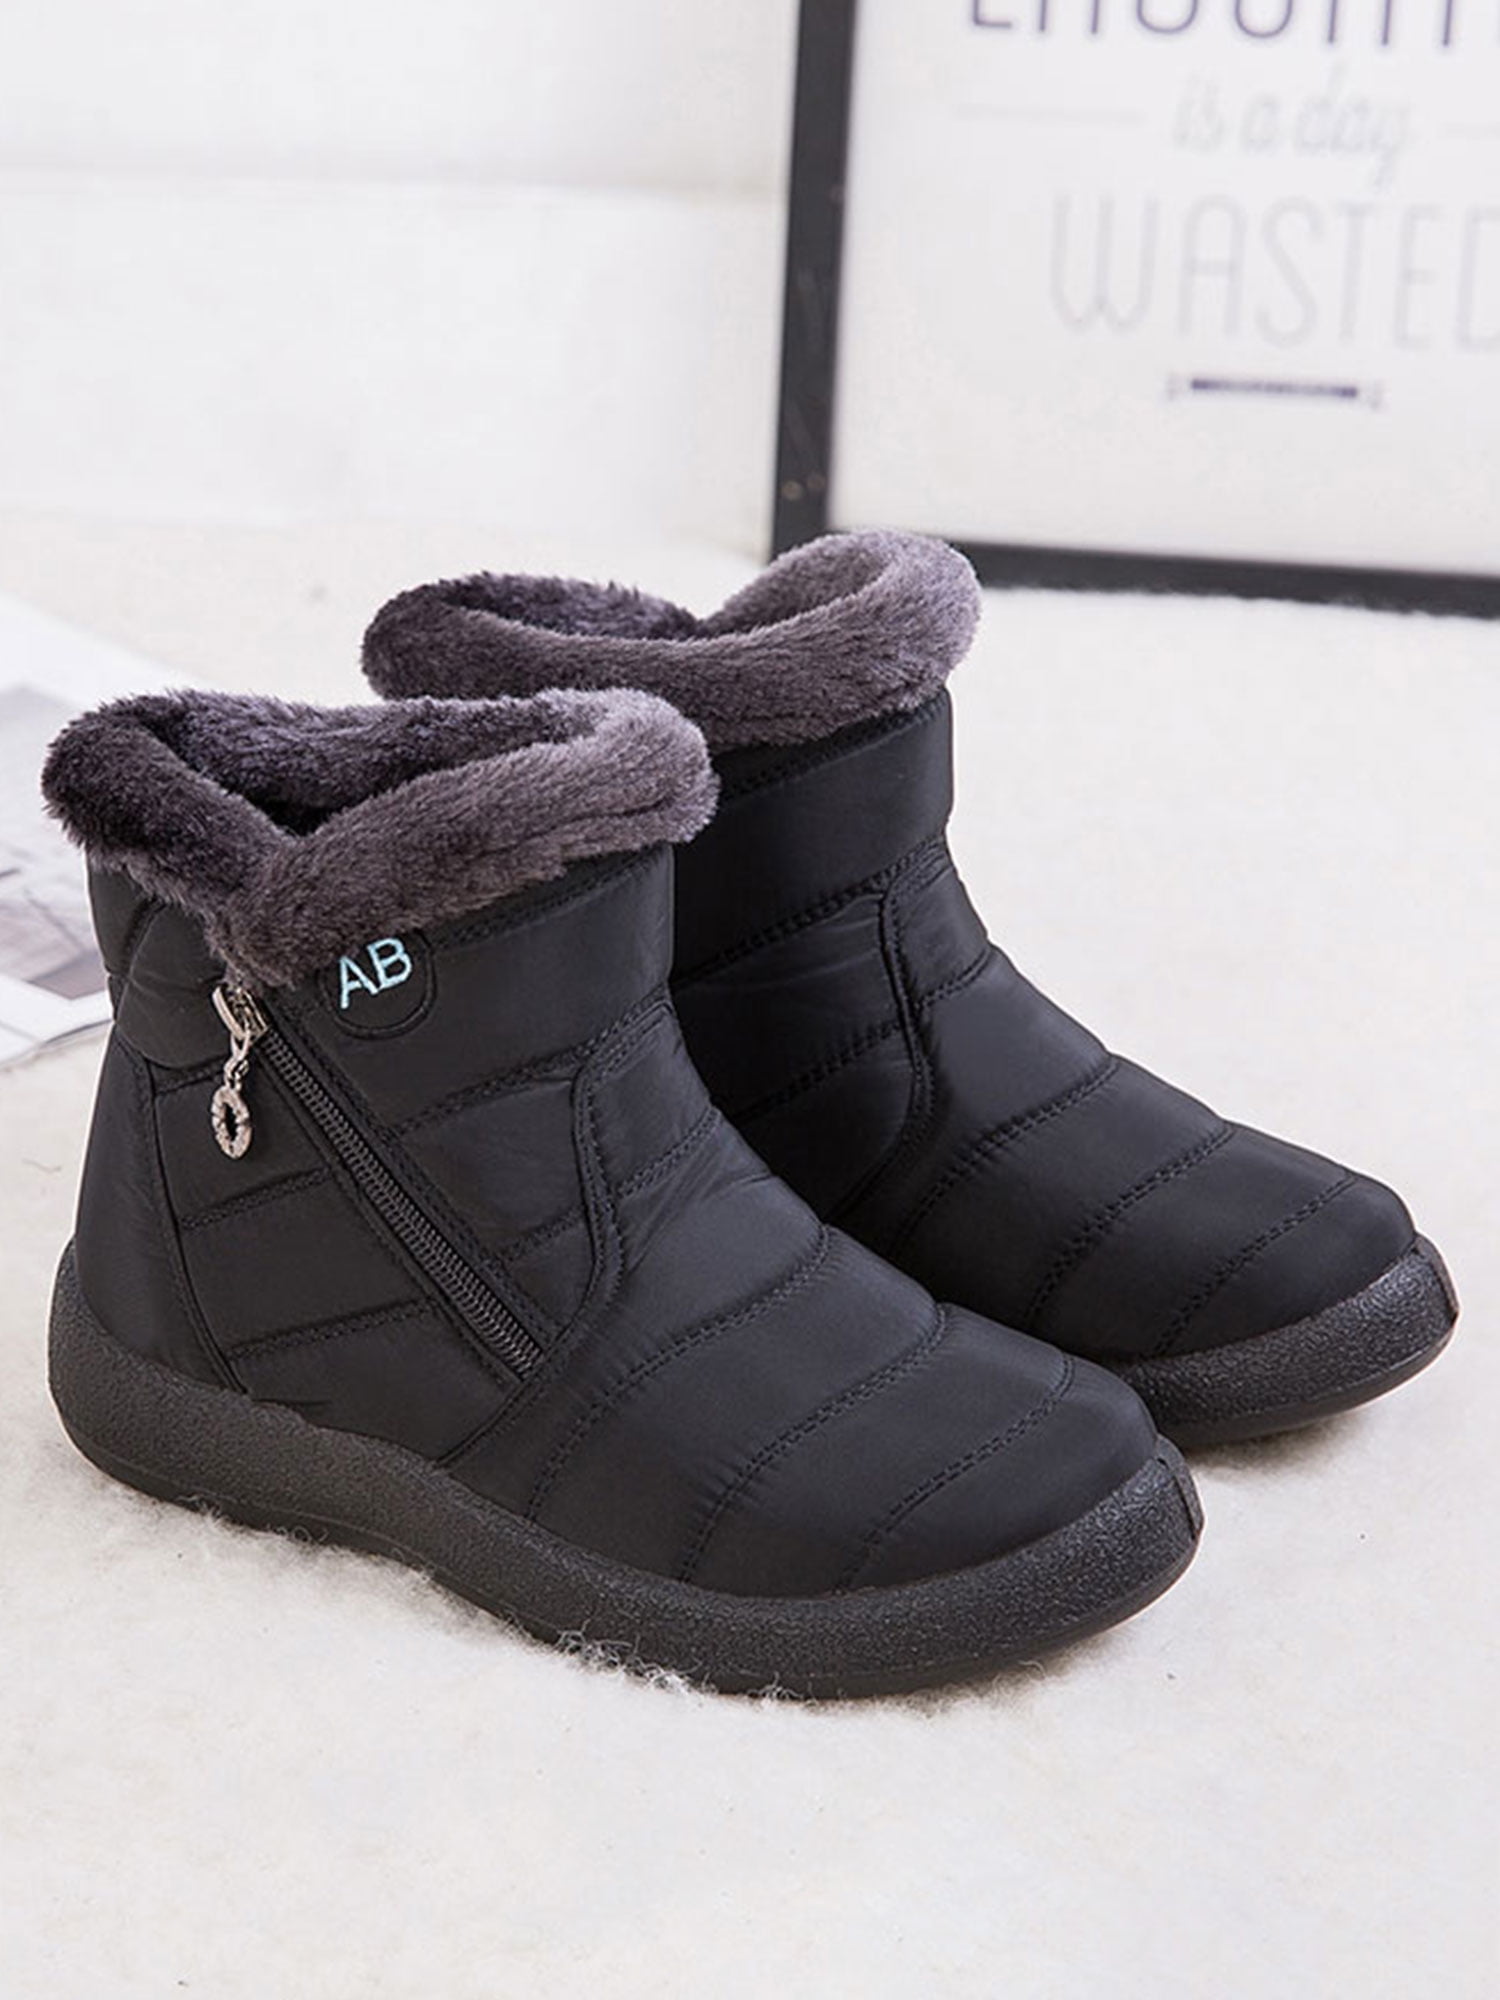 Details about   Winter Shoes Ankle Zip Boots Women's Size Heel Side Plus Toe High Platform New 